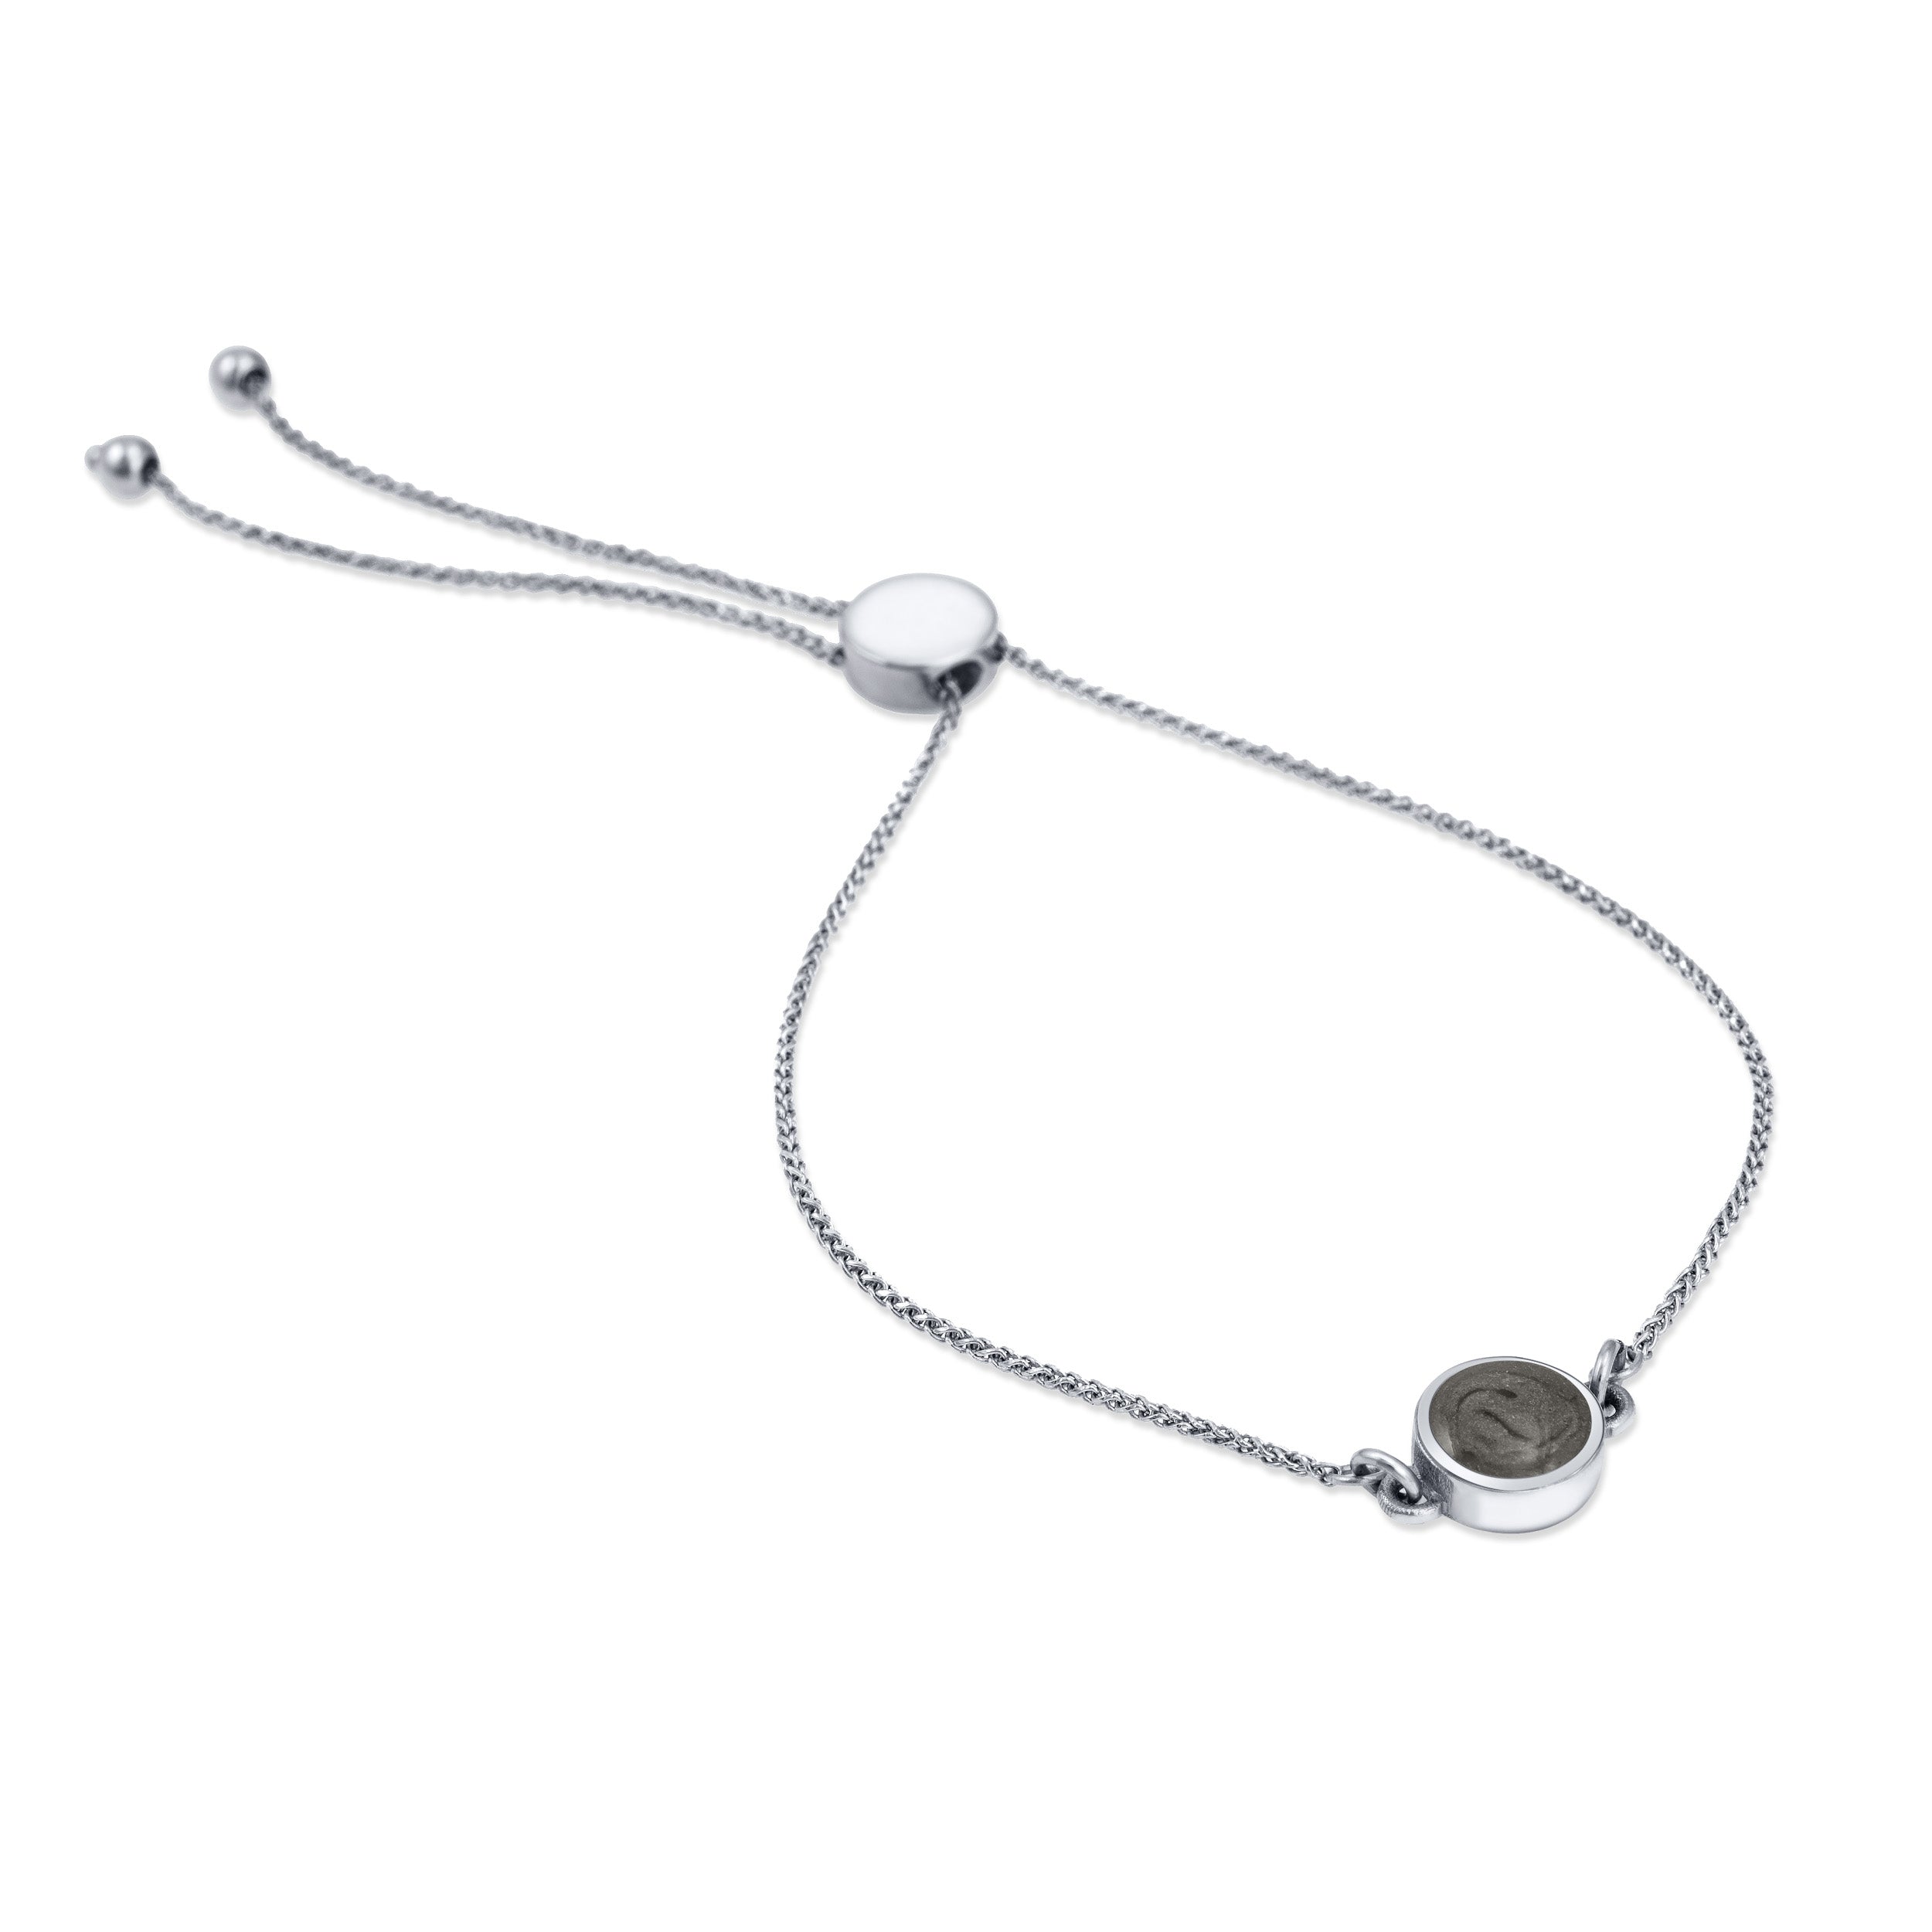 Ashes in glass silver bangle with silver heart charm | forgetmenotglassuk